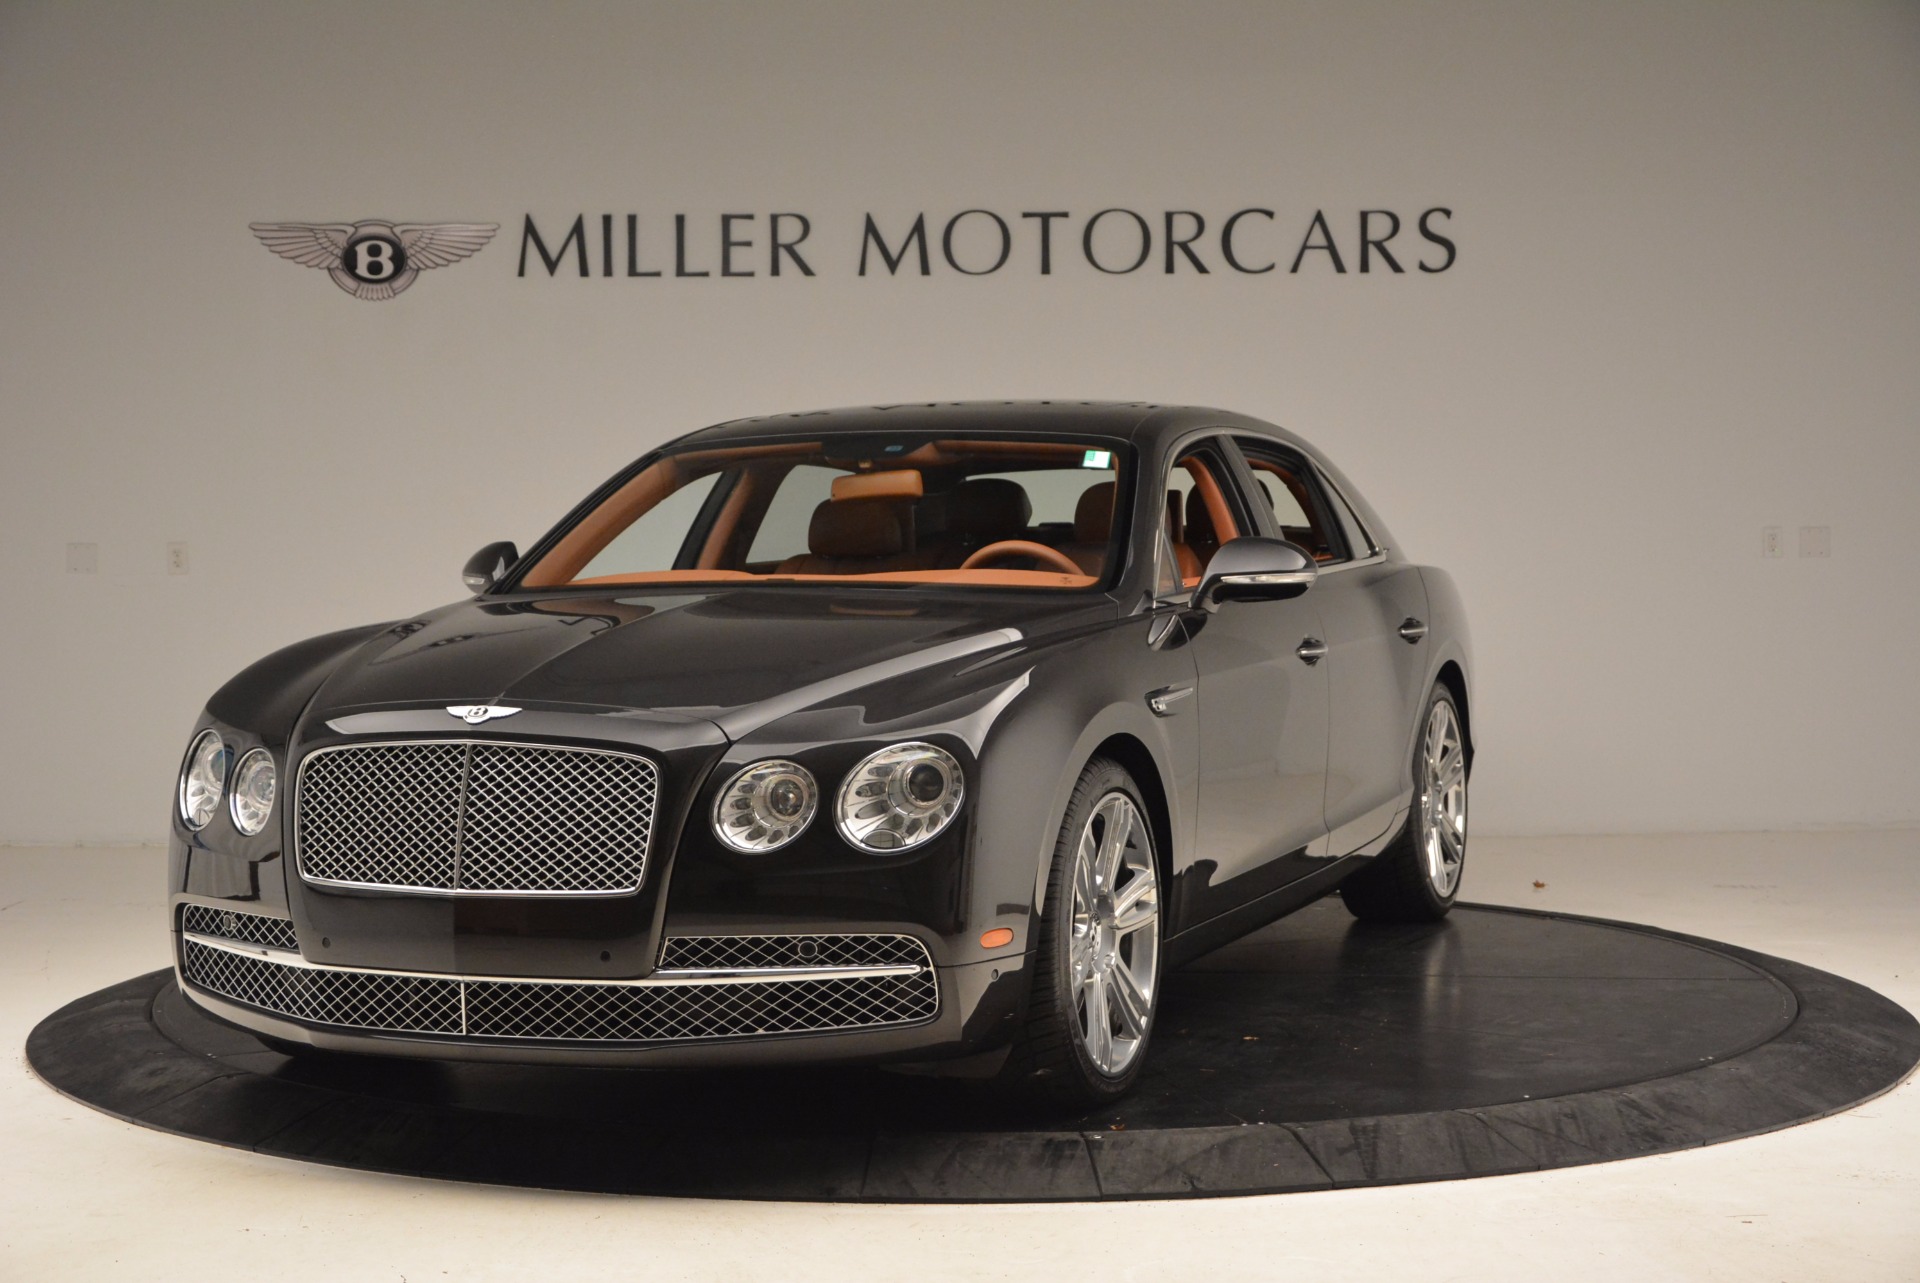 Used 2014 Bentley Flying Spur W12 for sale Sold at McLaren Greenwich in Greenwich CT 06830 1